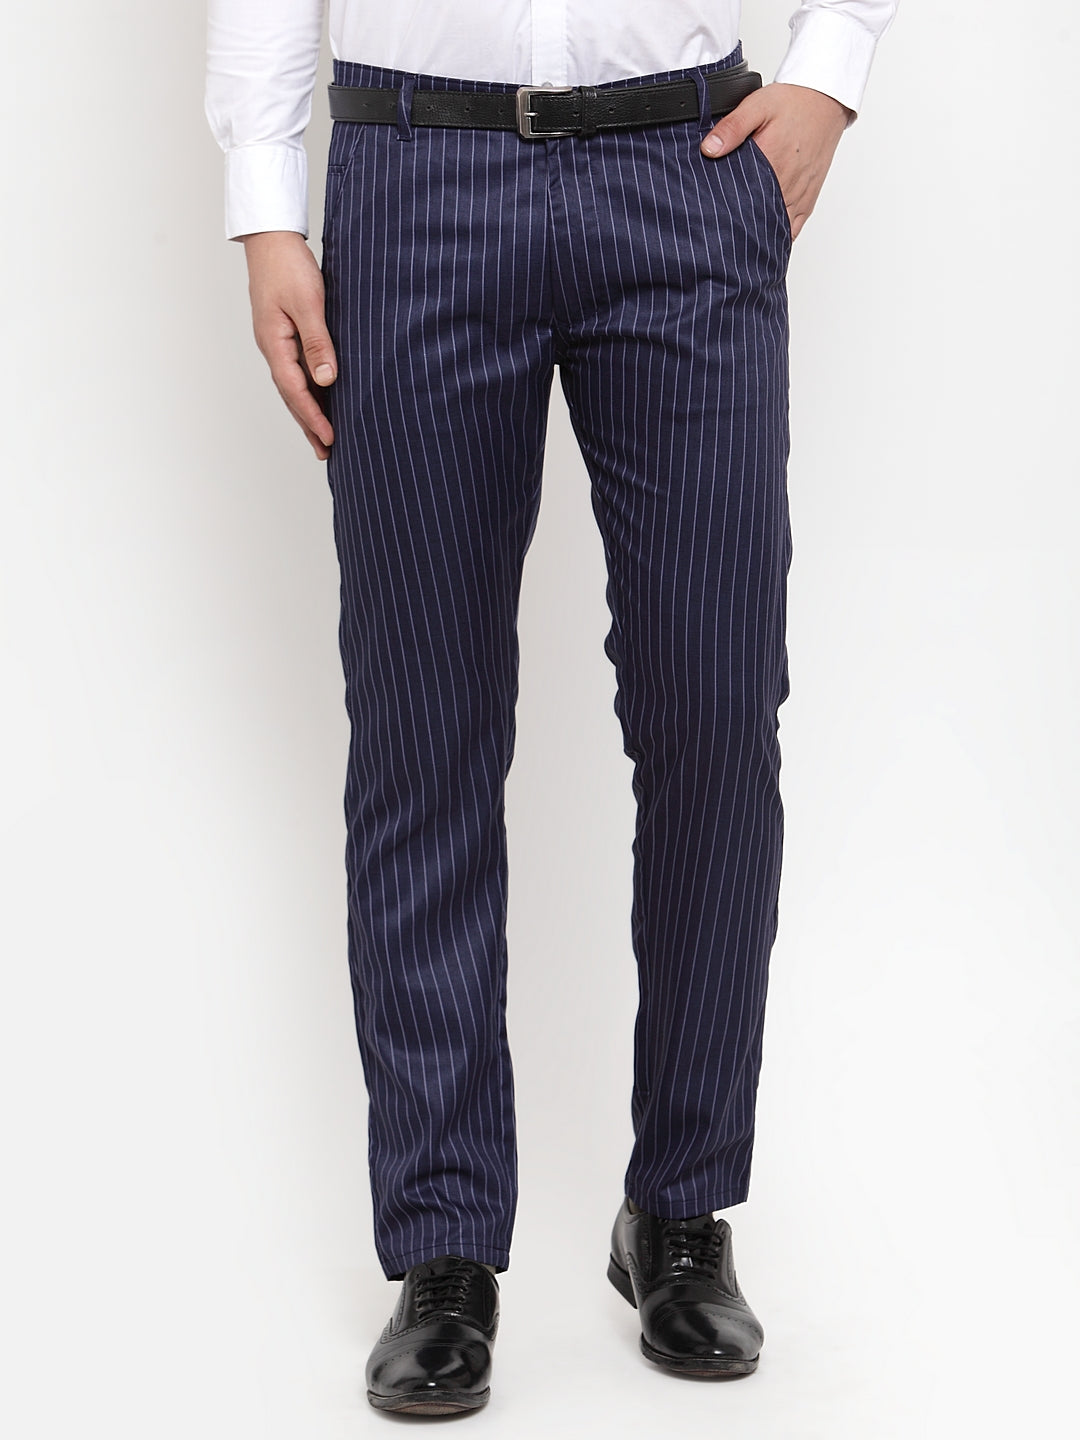 Buy Mast & Harbour Men Navy Blue & White Pure Cotton Slim Fit Striped  Trousers - Trousers for Men 13490728 | Myntra